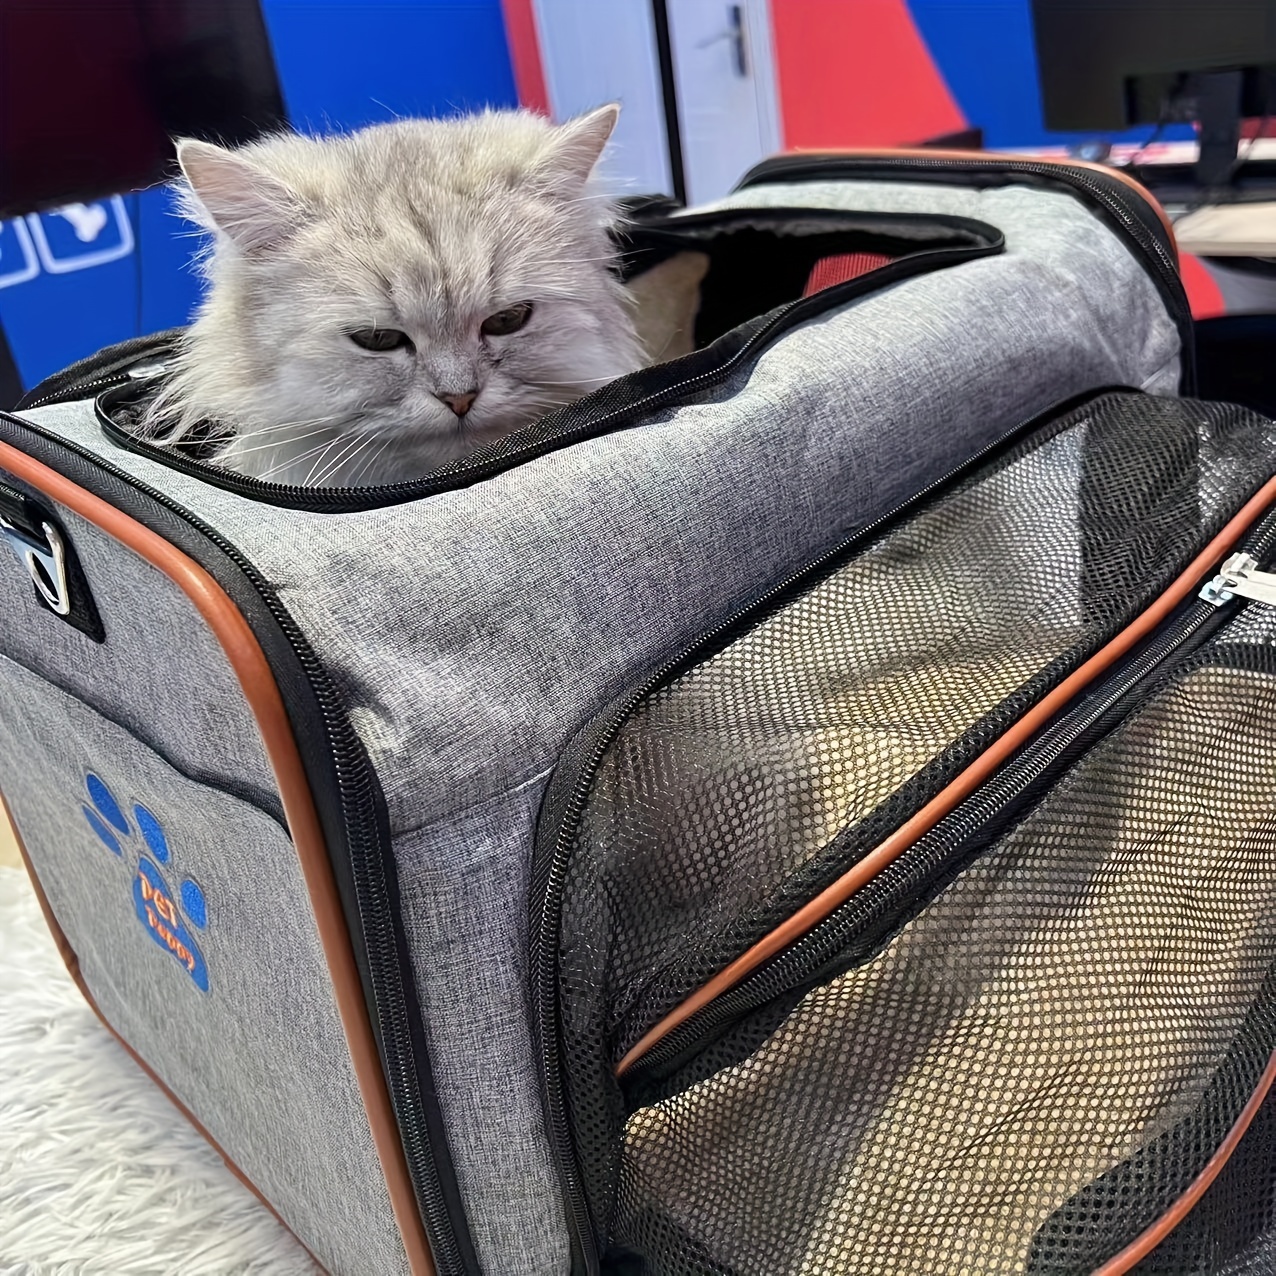 MOV COMPRA MOV cOMPRA Double Layer cat carrier Backpack Removable cat  carrier for 2 cats collapsible Pet carrier for Small Medium cats Dogs